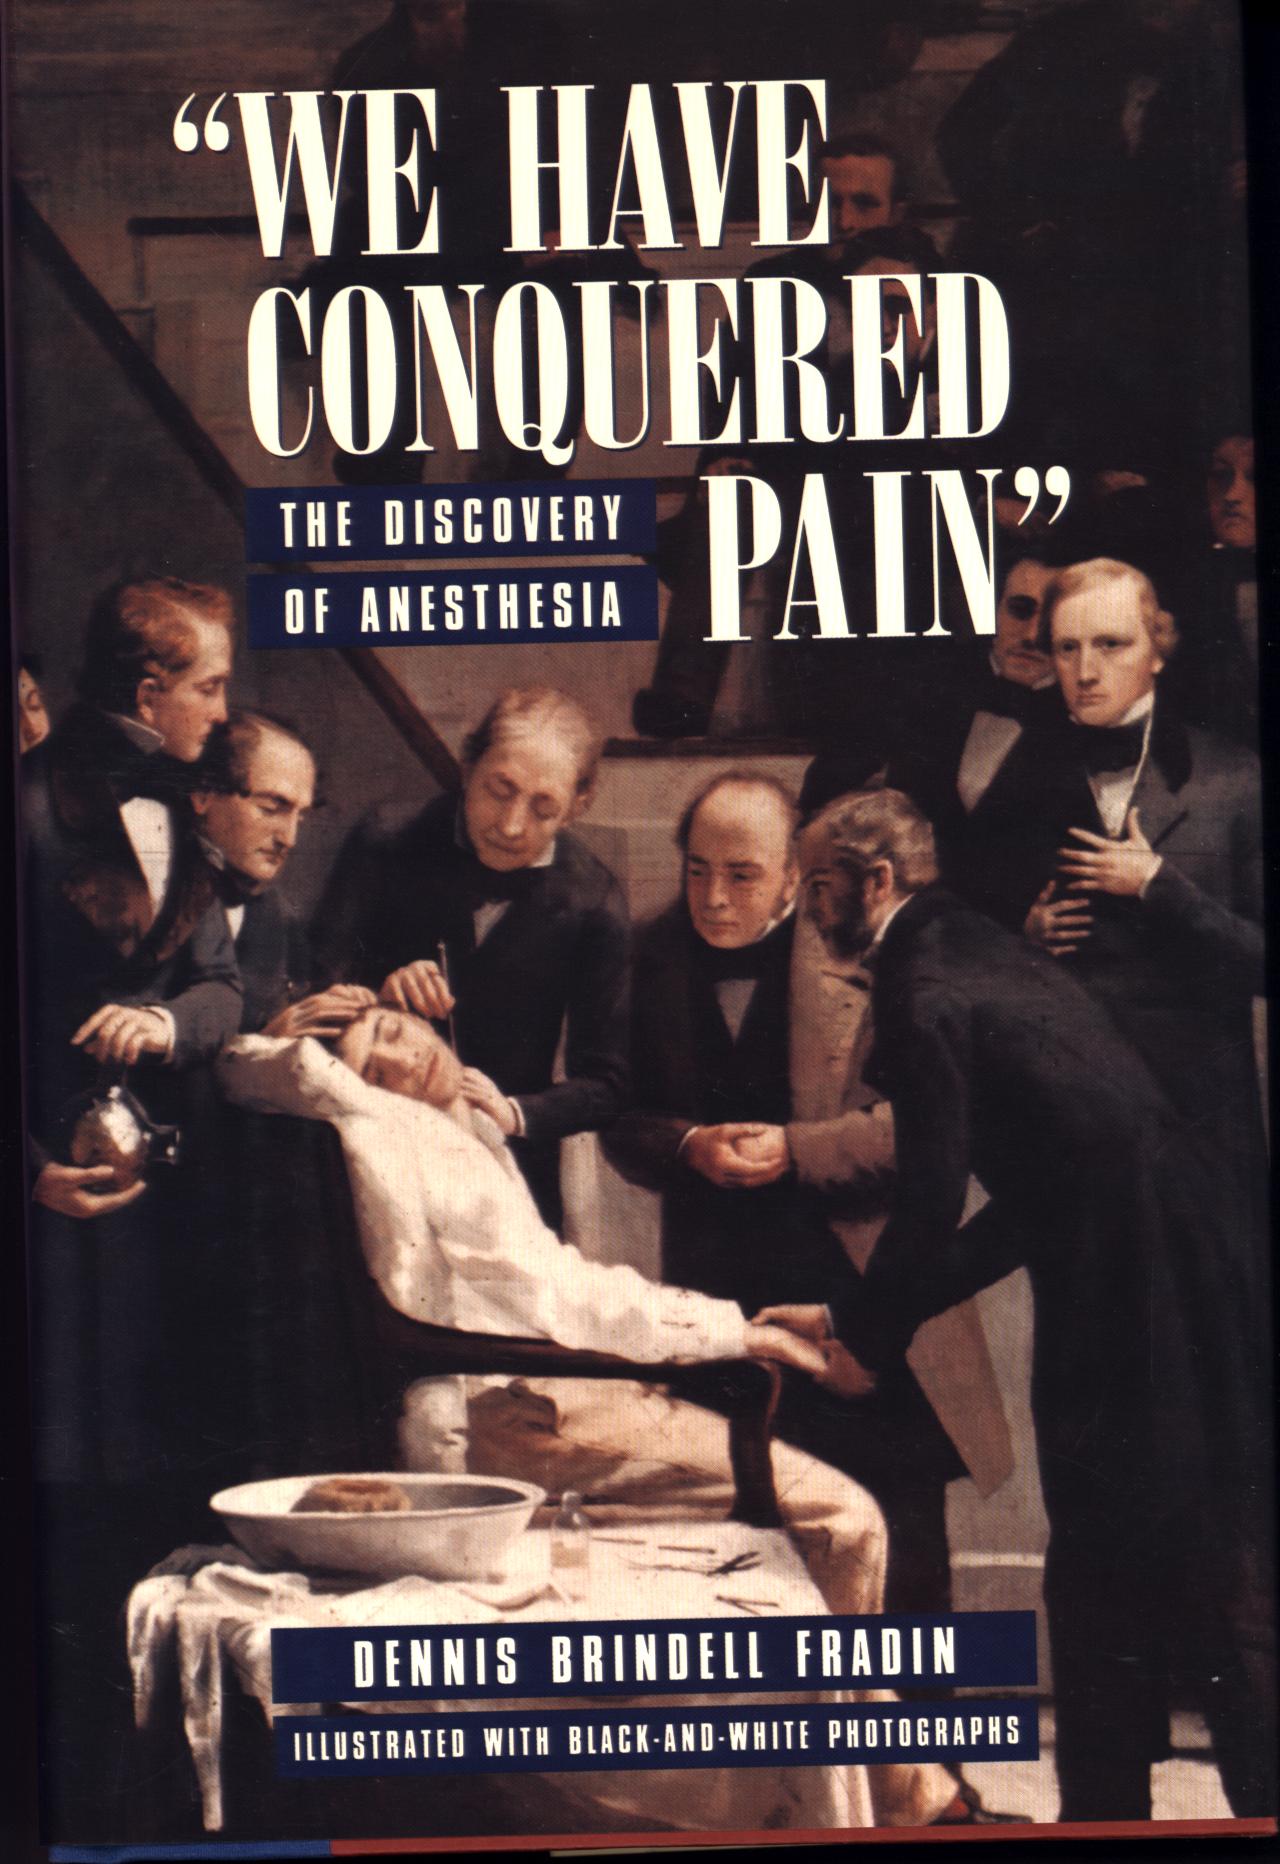 "WE HAVE CONQUERED PAIN": the discovery of anesthesia. 